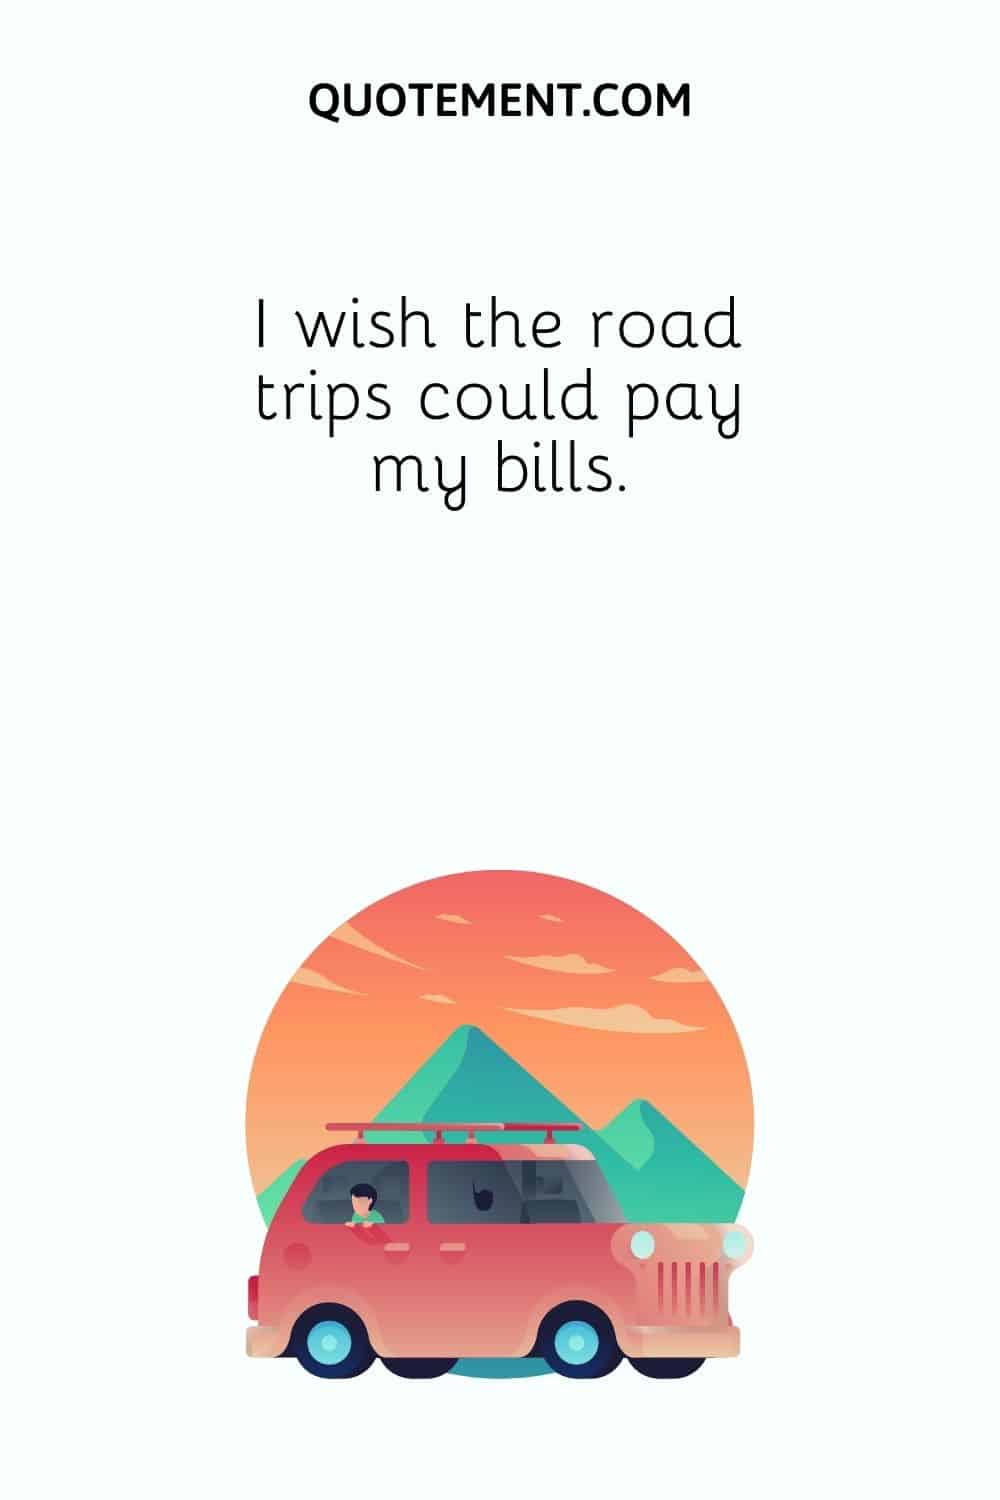 I wish the road trips could pay my bills